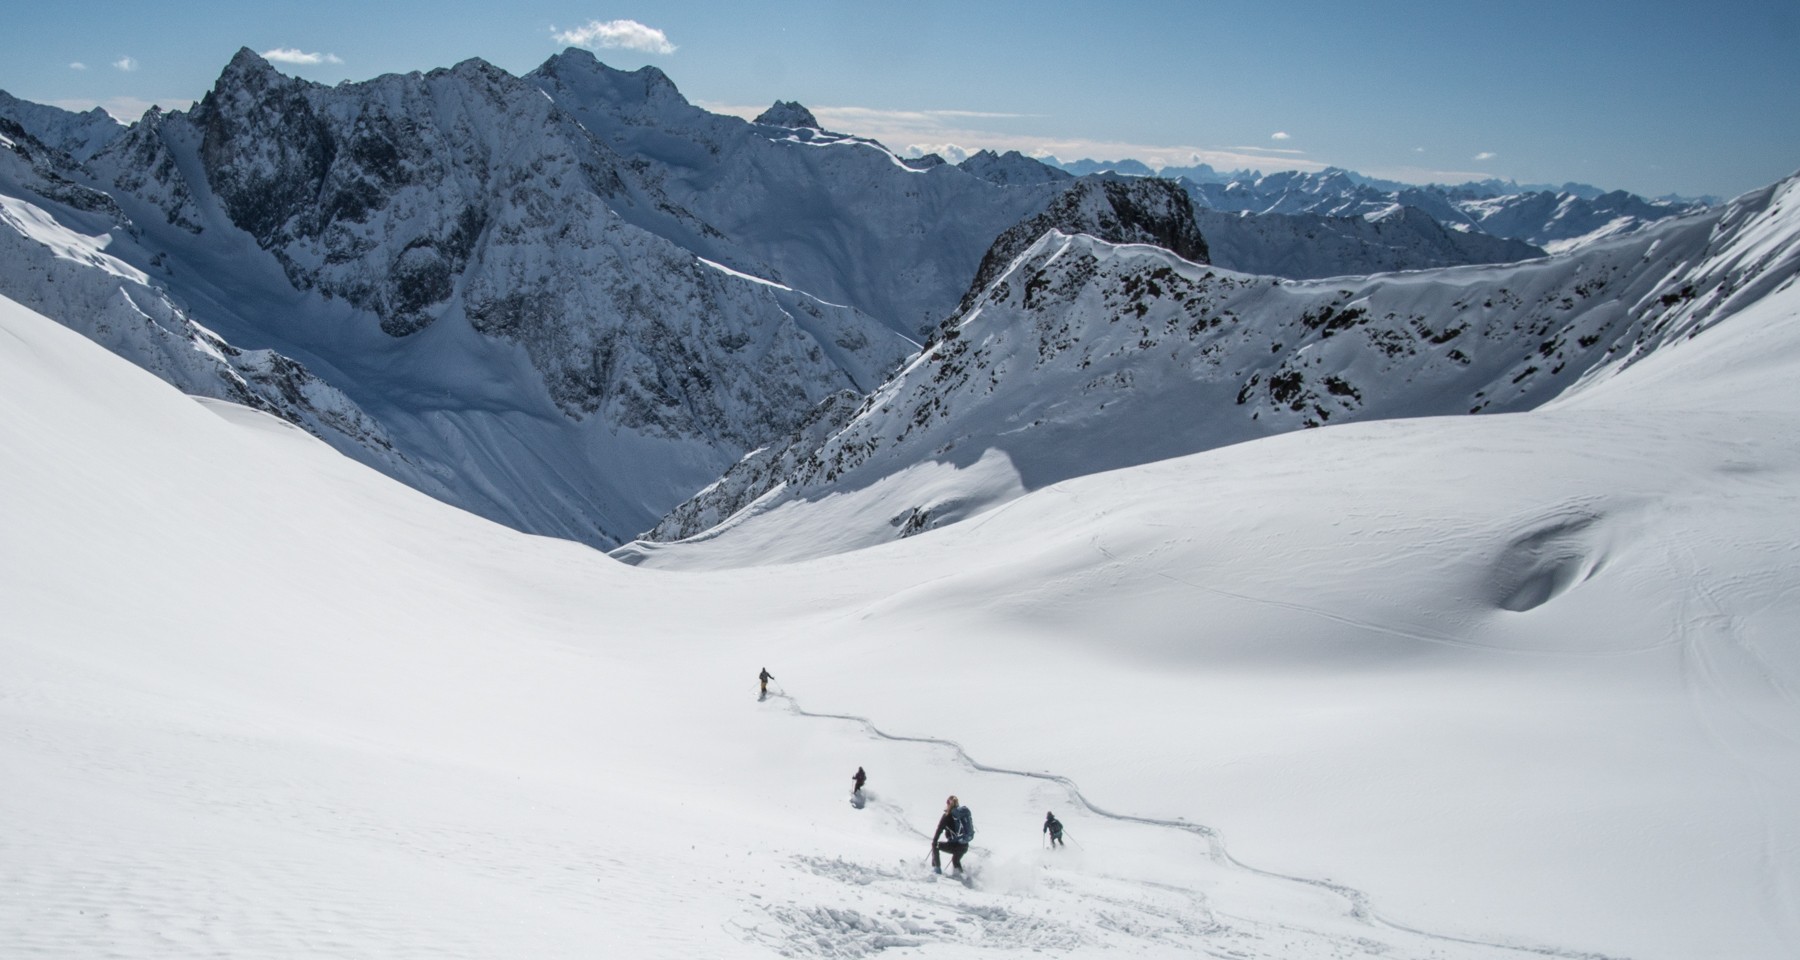 Ski Mountaineering with instruction